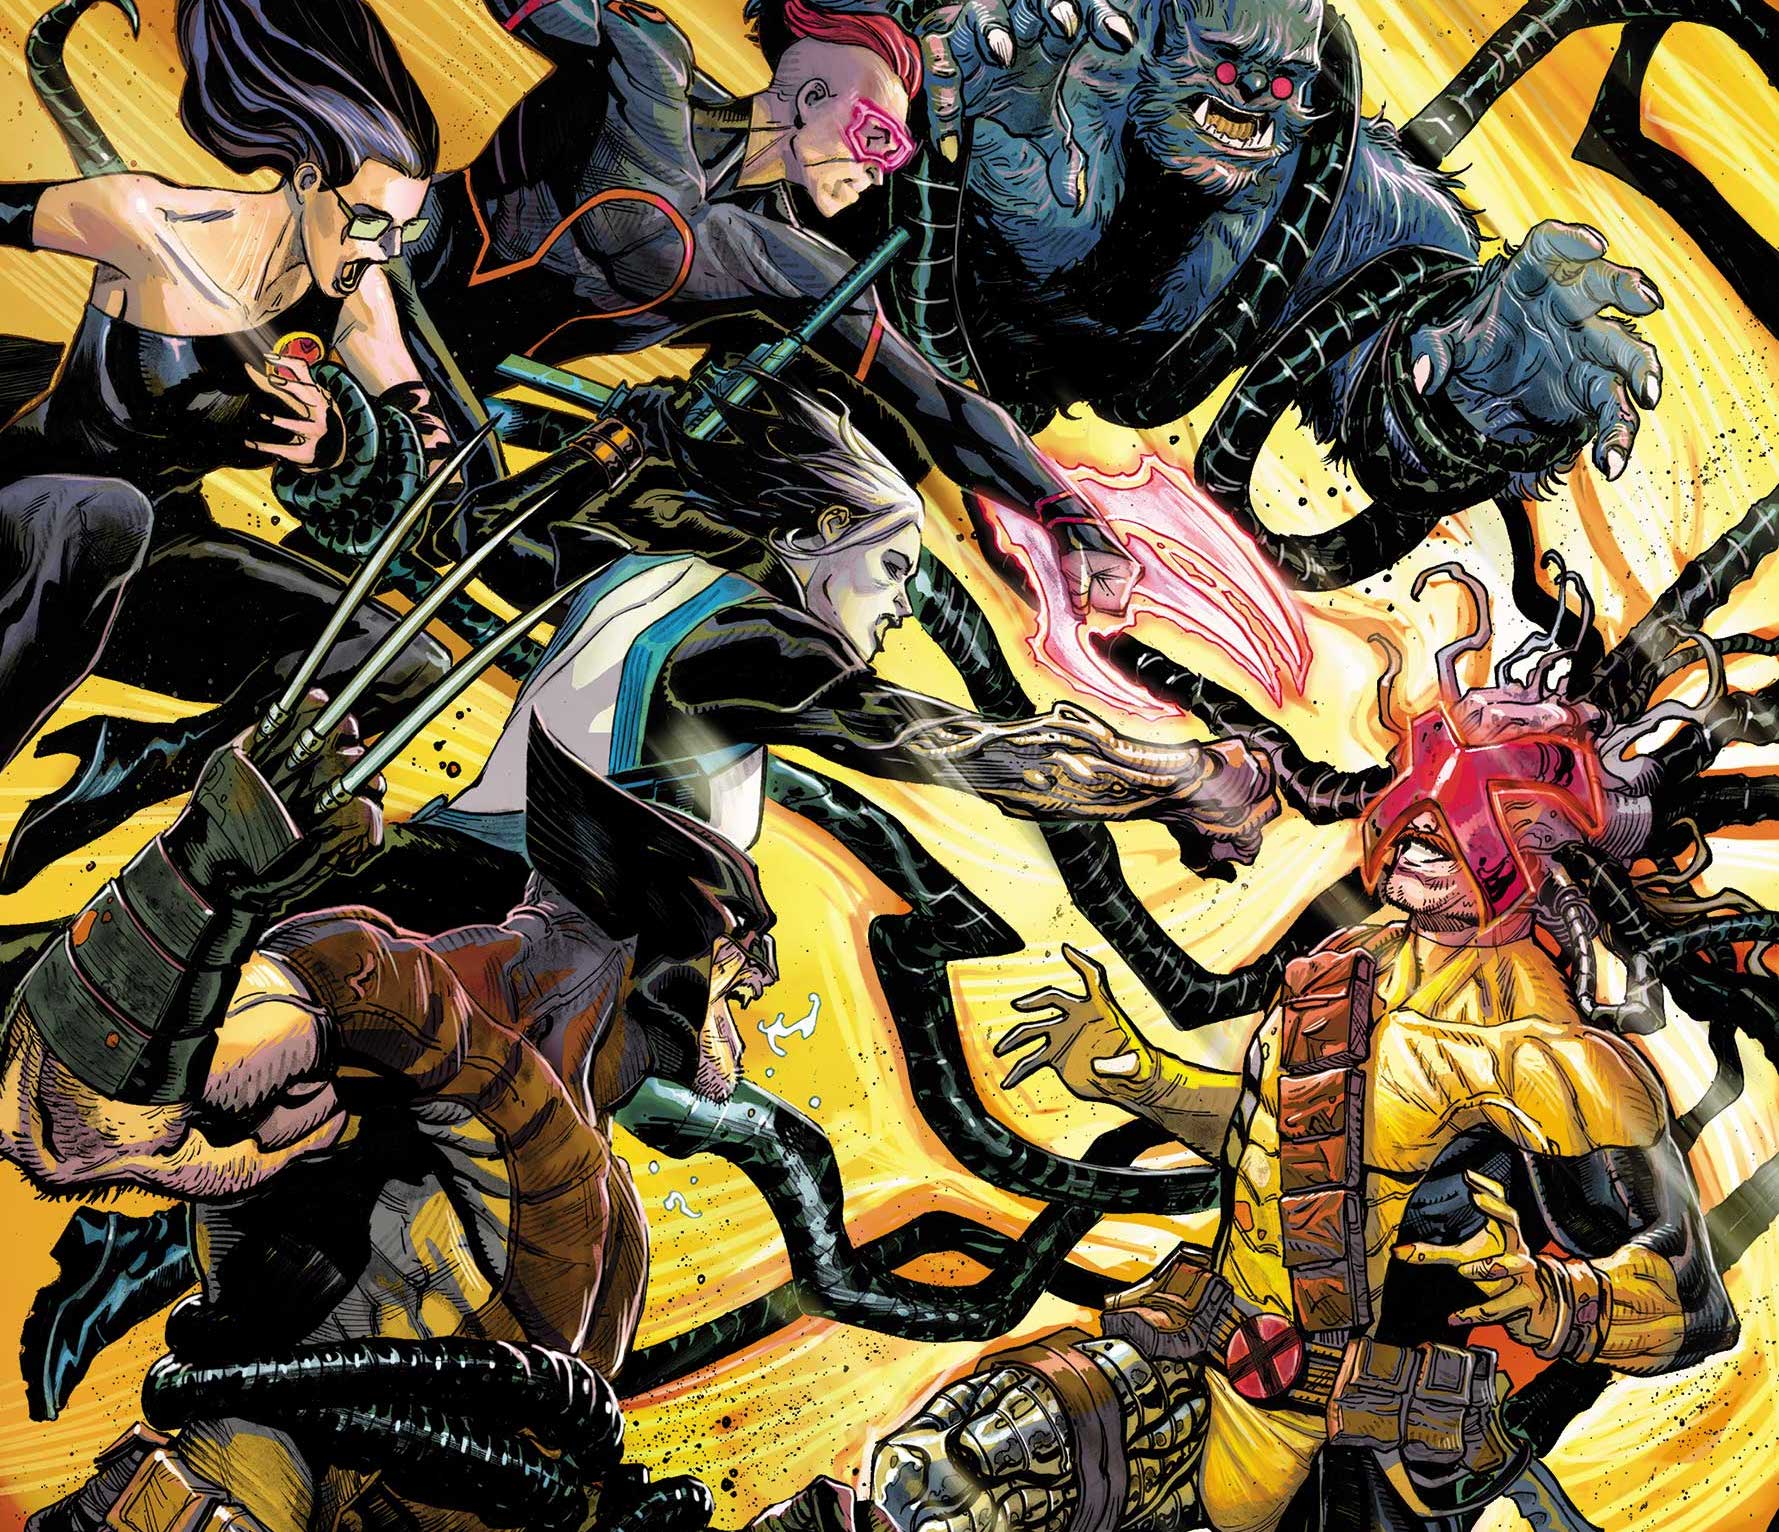 'X-Force' #27 features a new threat tying into Wolverine's recent adventures